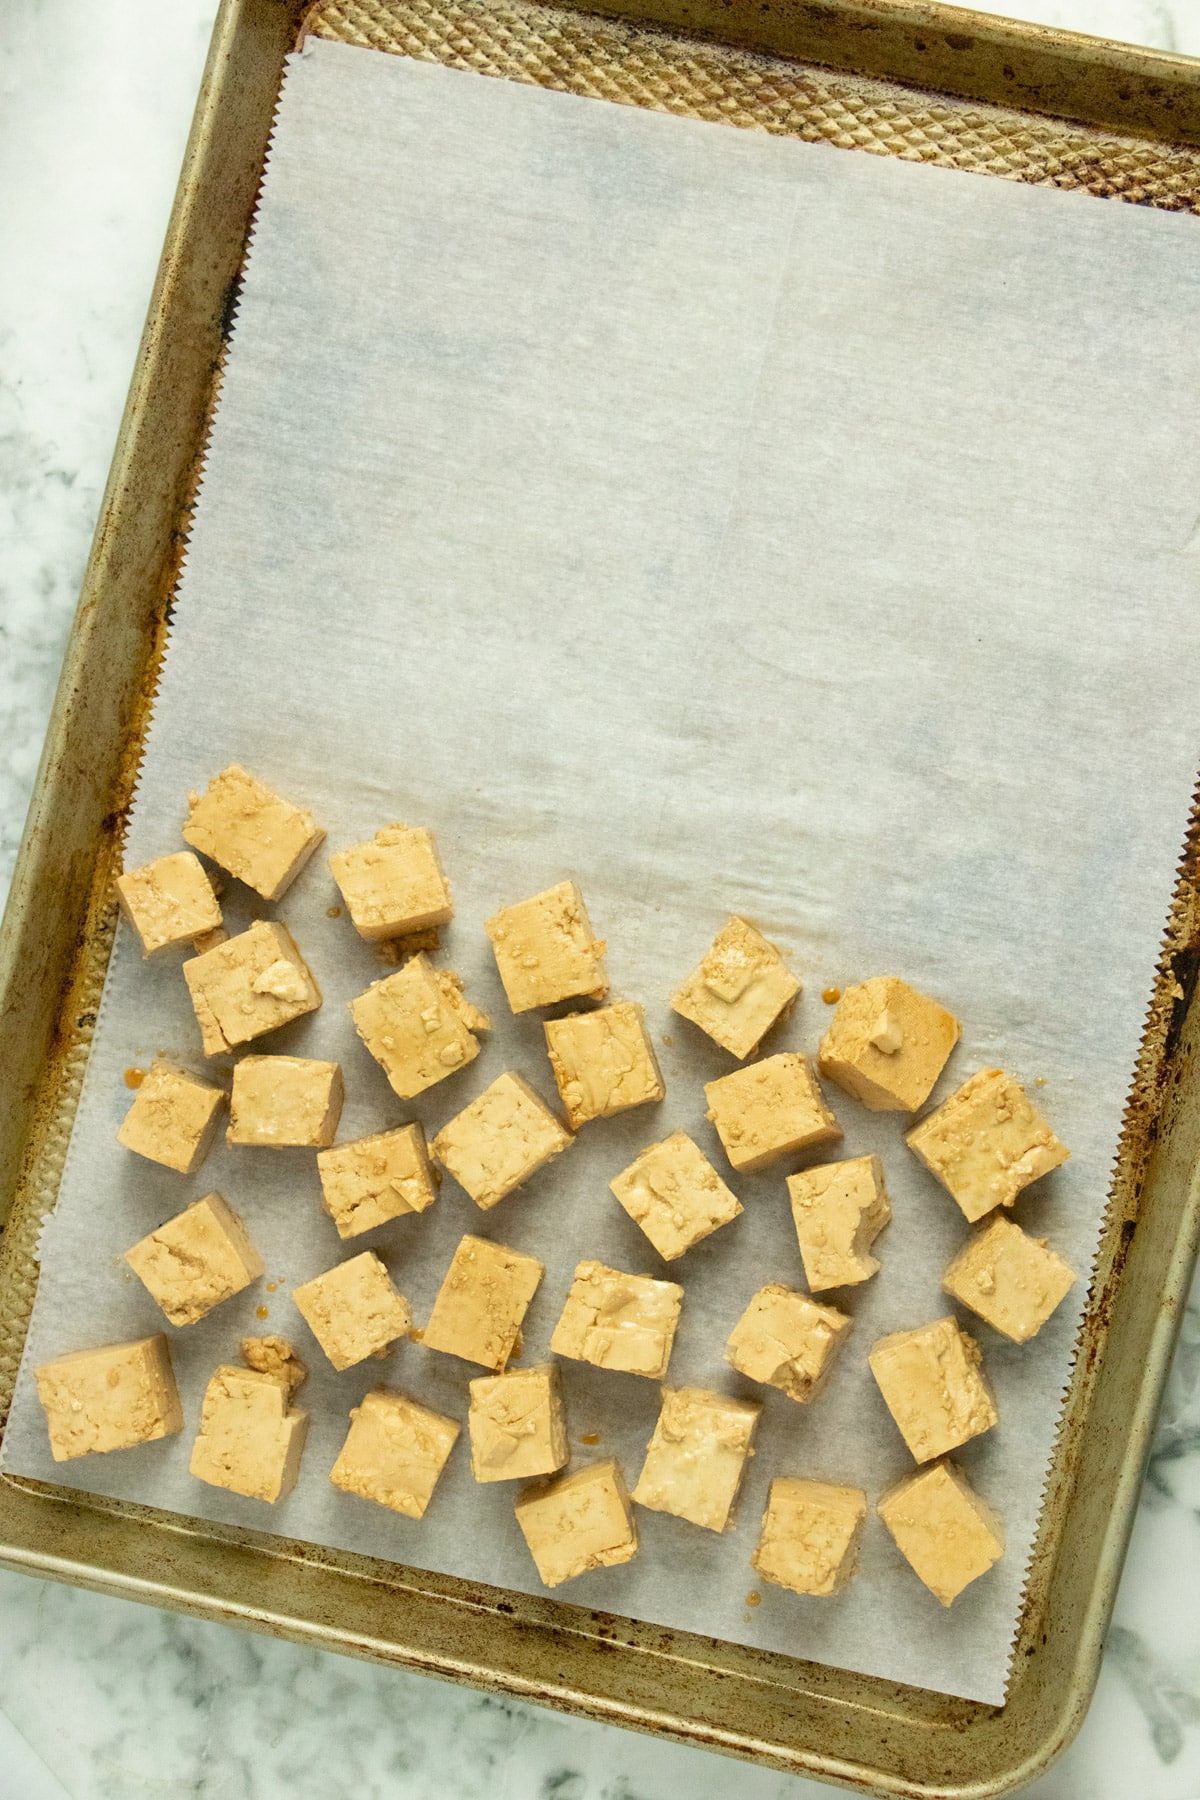 lined baking sheet with marinated tofu arranged in a single layer on one half of it